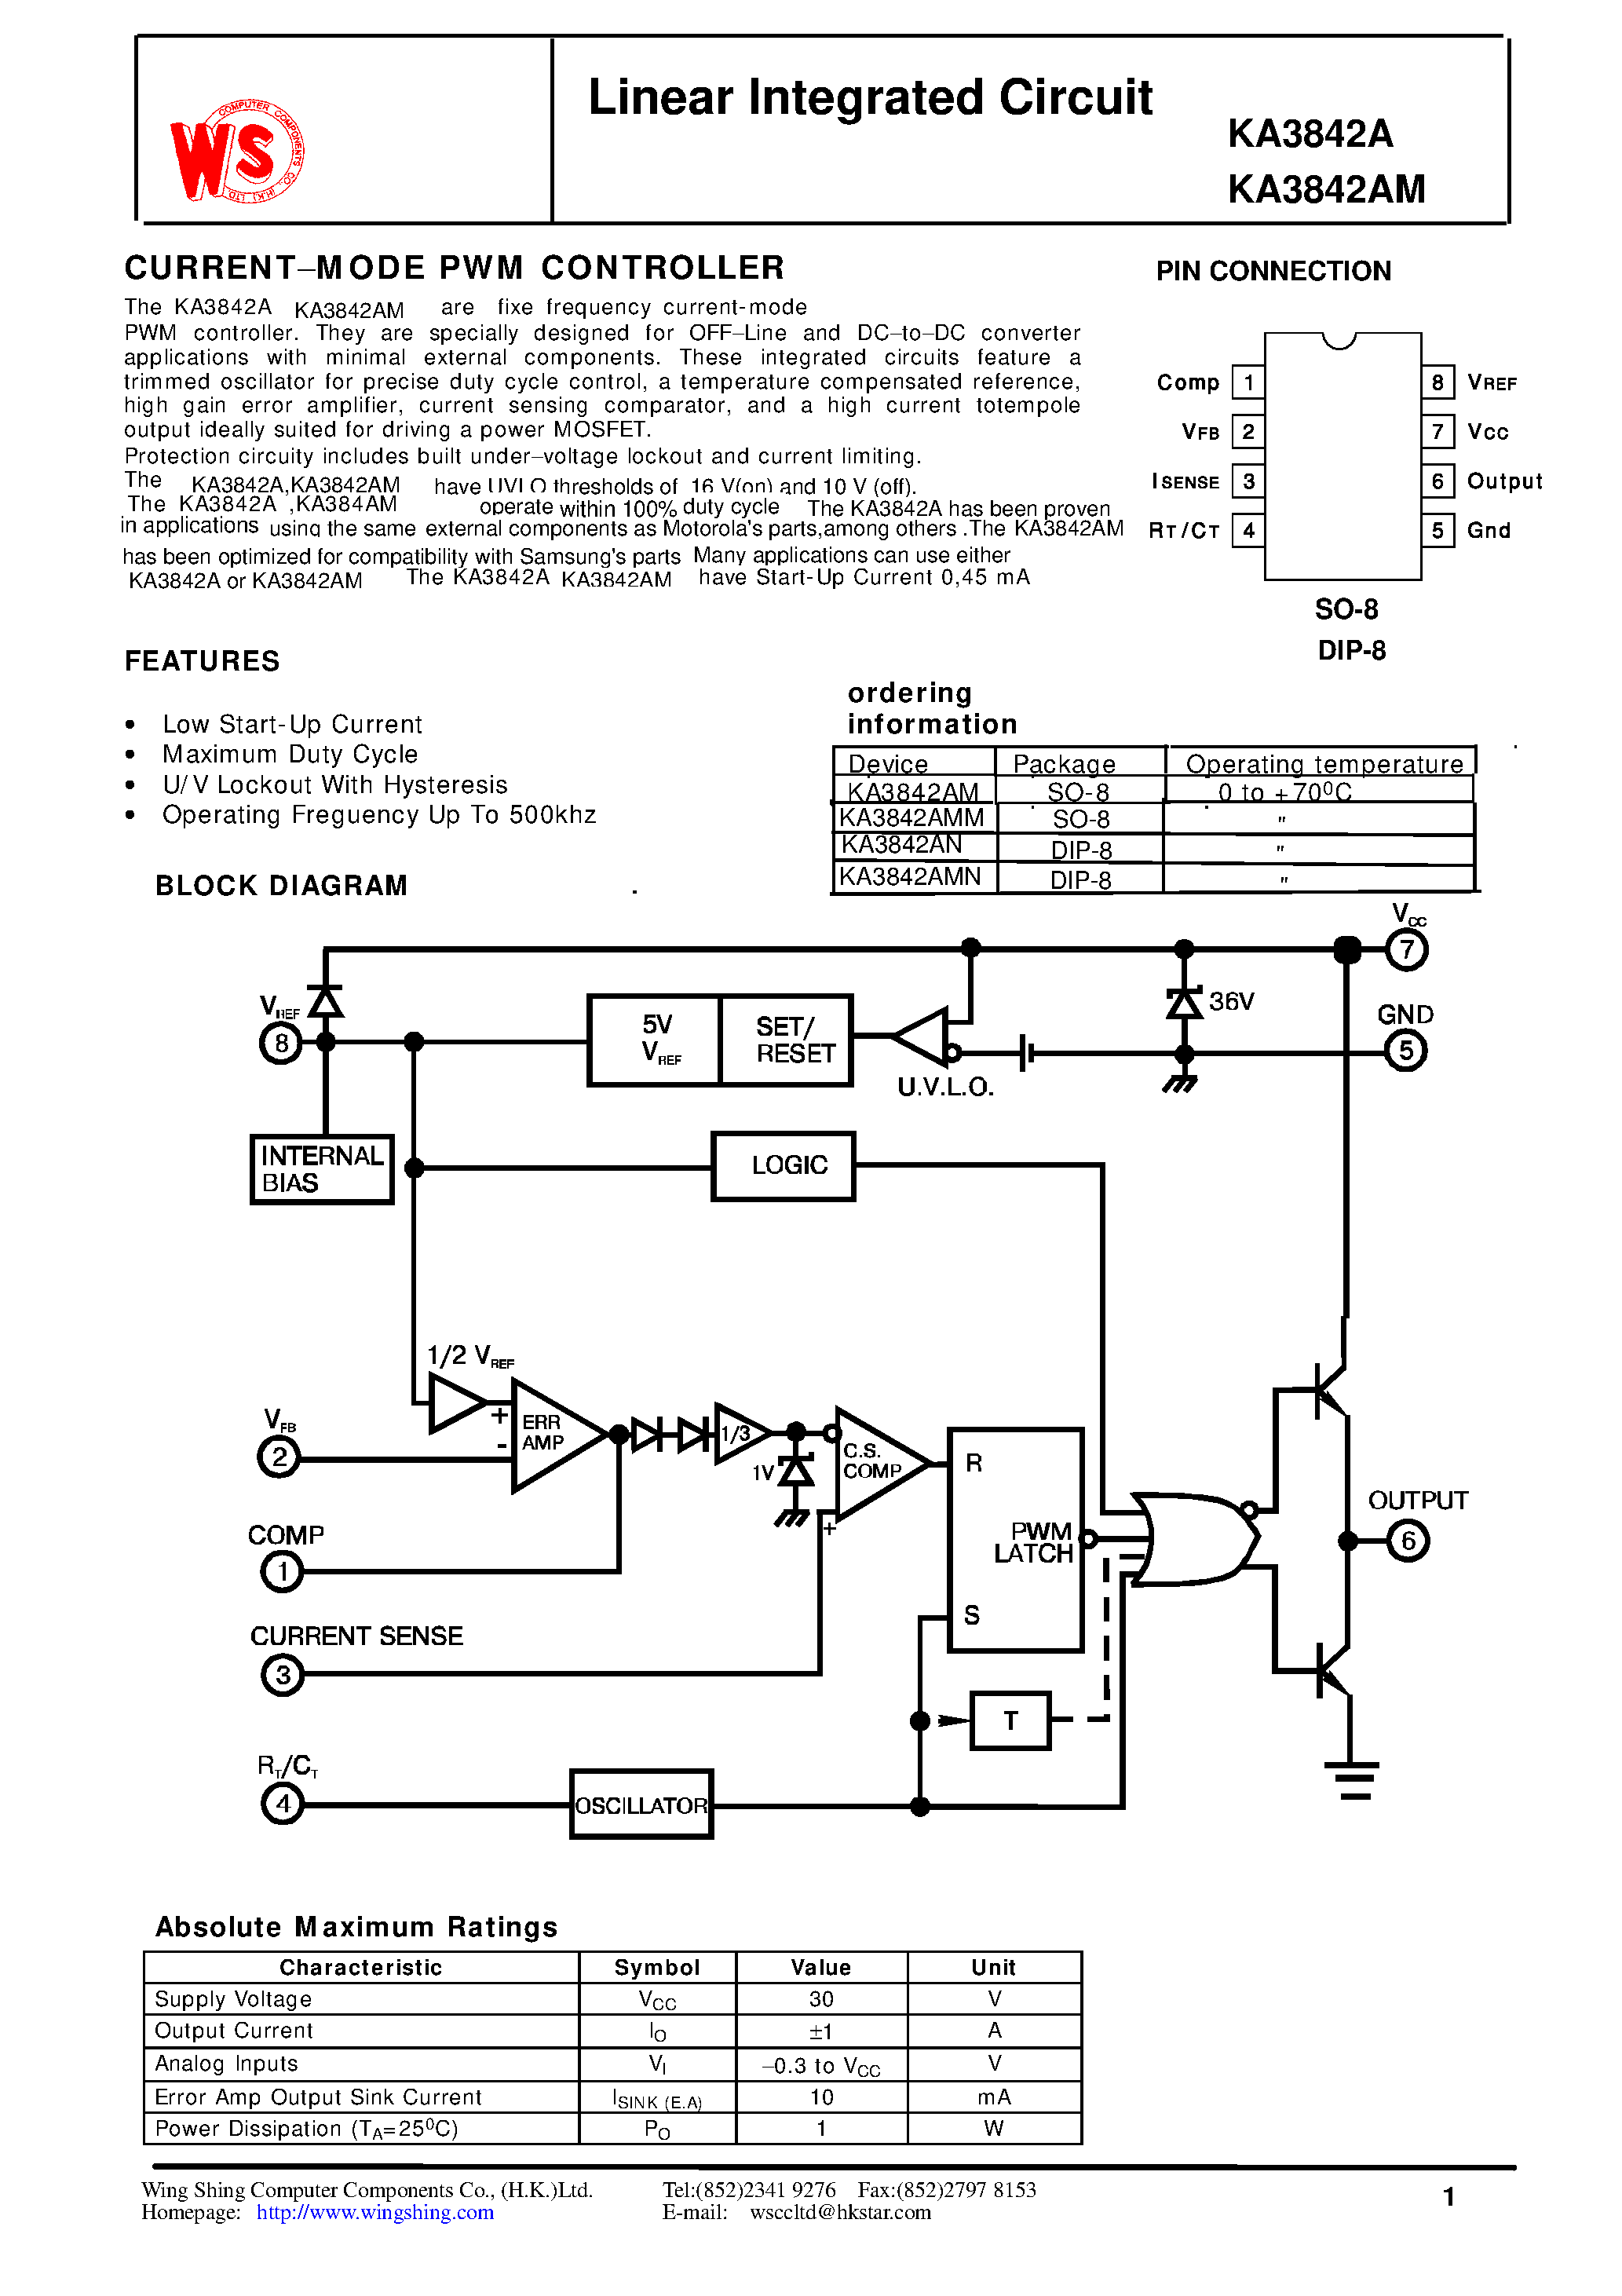 Datasheet KA3842AM - Linear Integrated Circuit(CURRENT-MODE PWM CONTROLLER) page 1